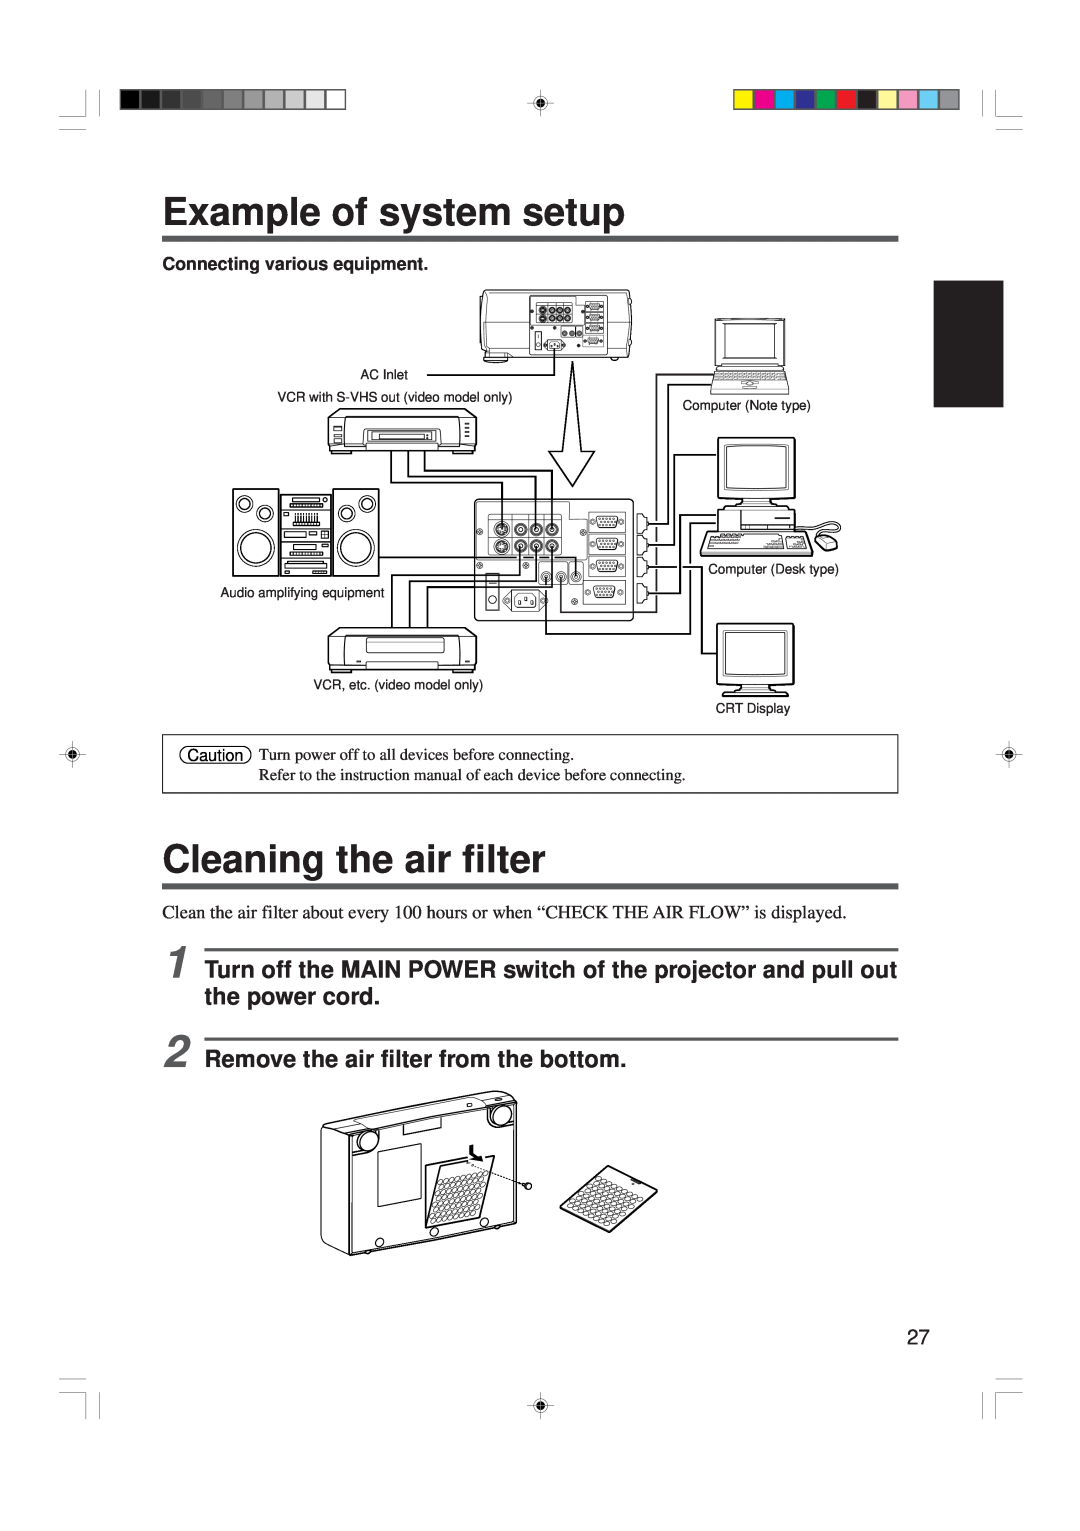 Hitachi CP-X955W/E specifications Example of system setup, Cleaning the air filter, Remove the air filter from the bottom 